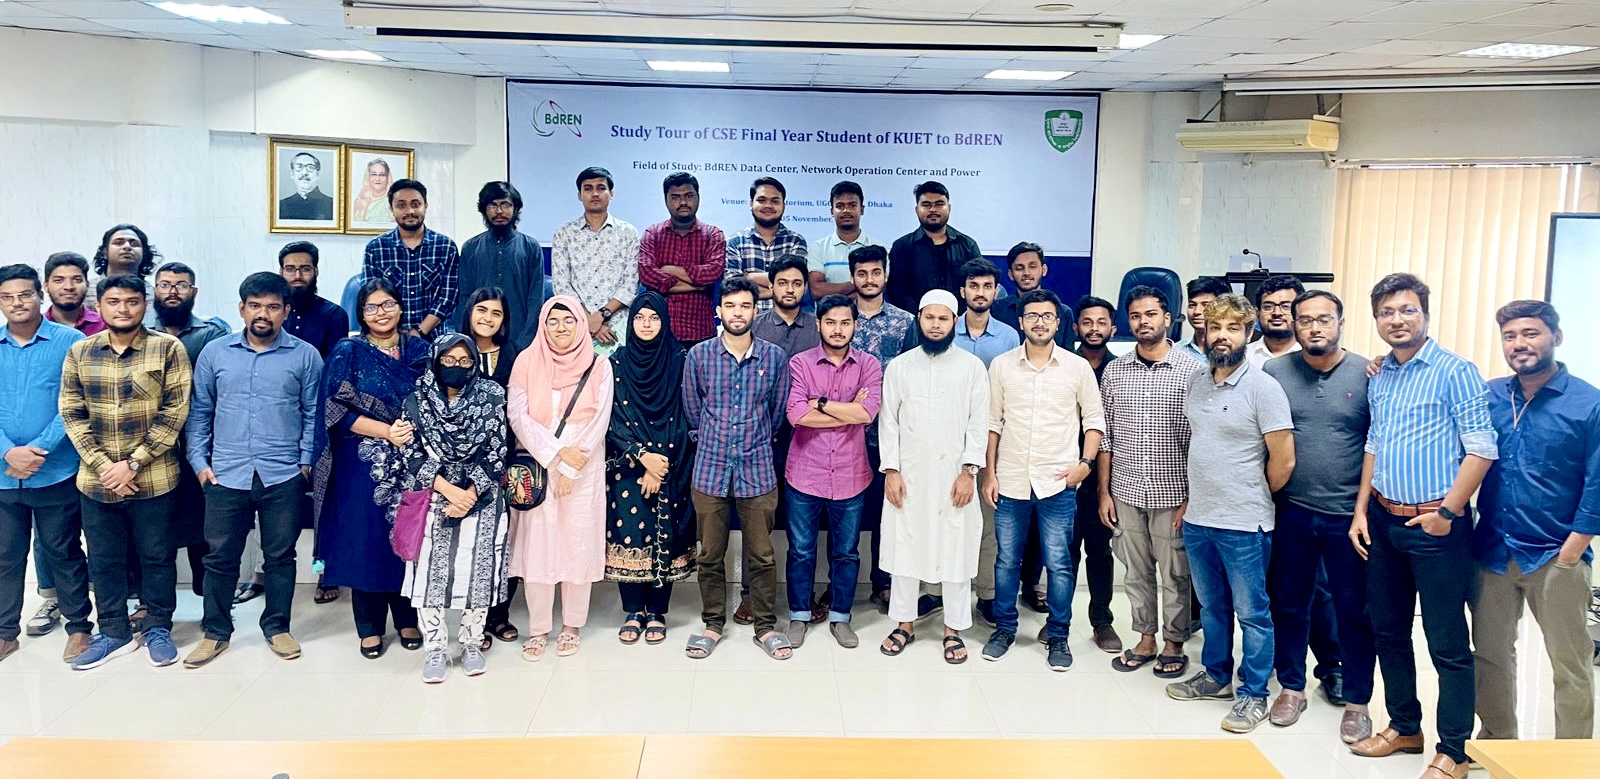 Study Tour at BdREN Data Center by the Final Year Students' of Department of CSE, KUET